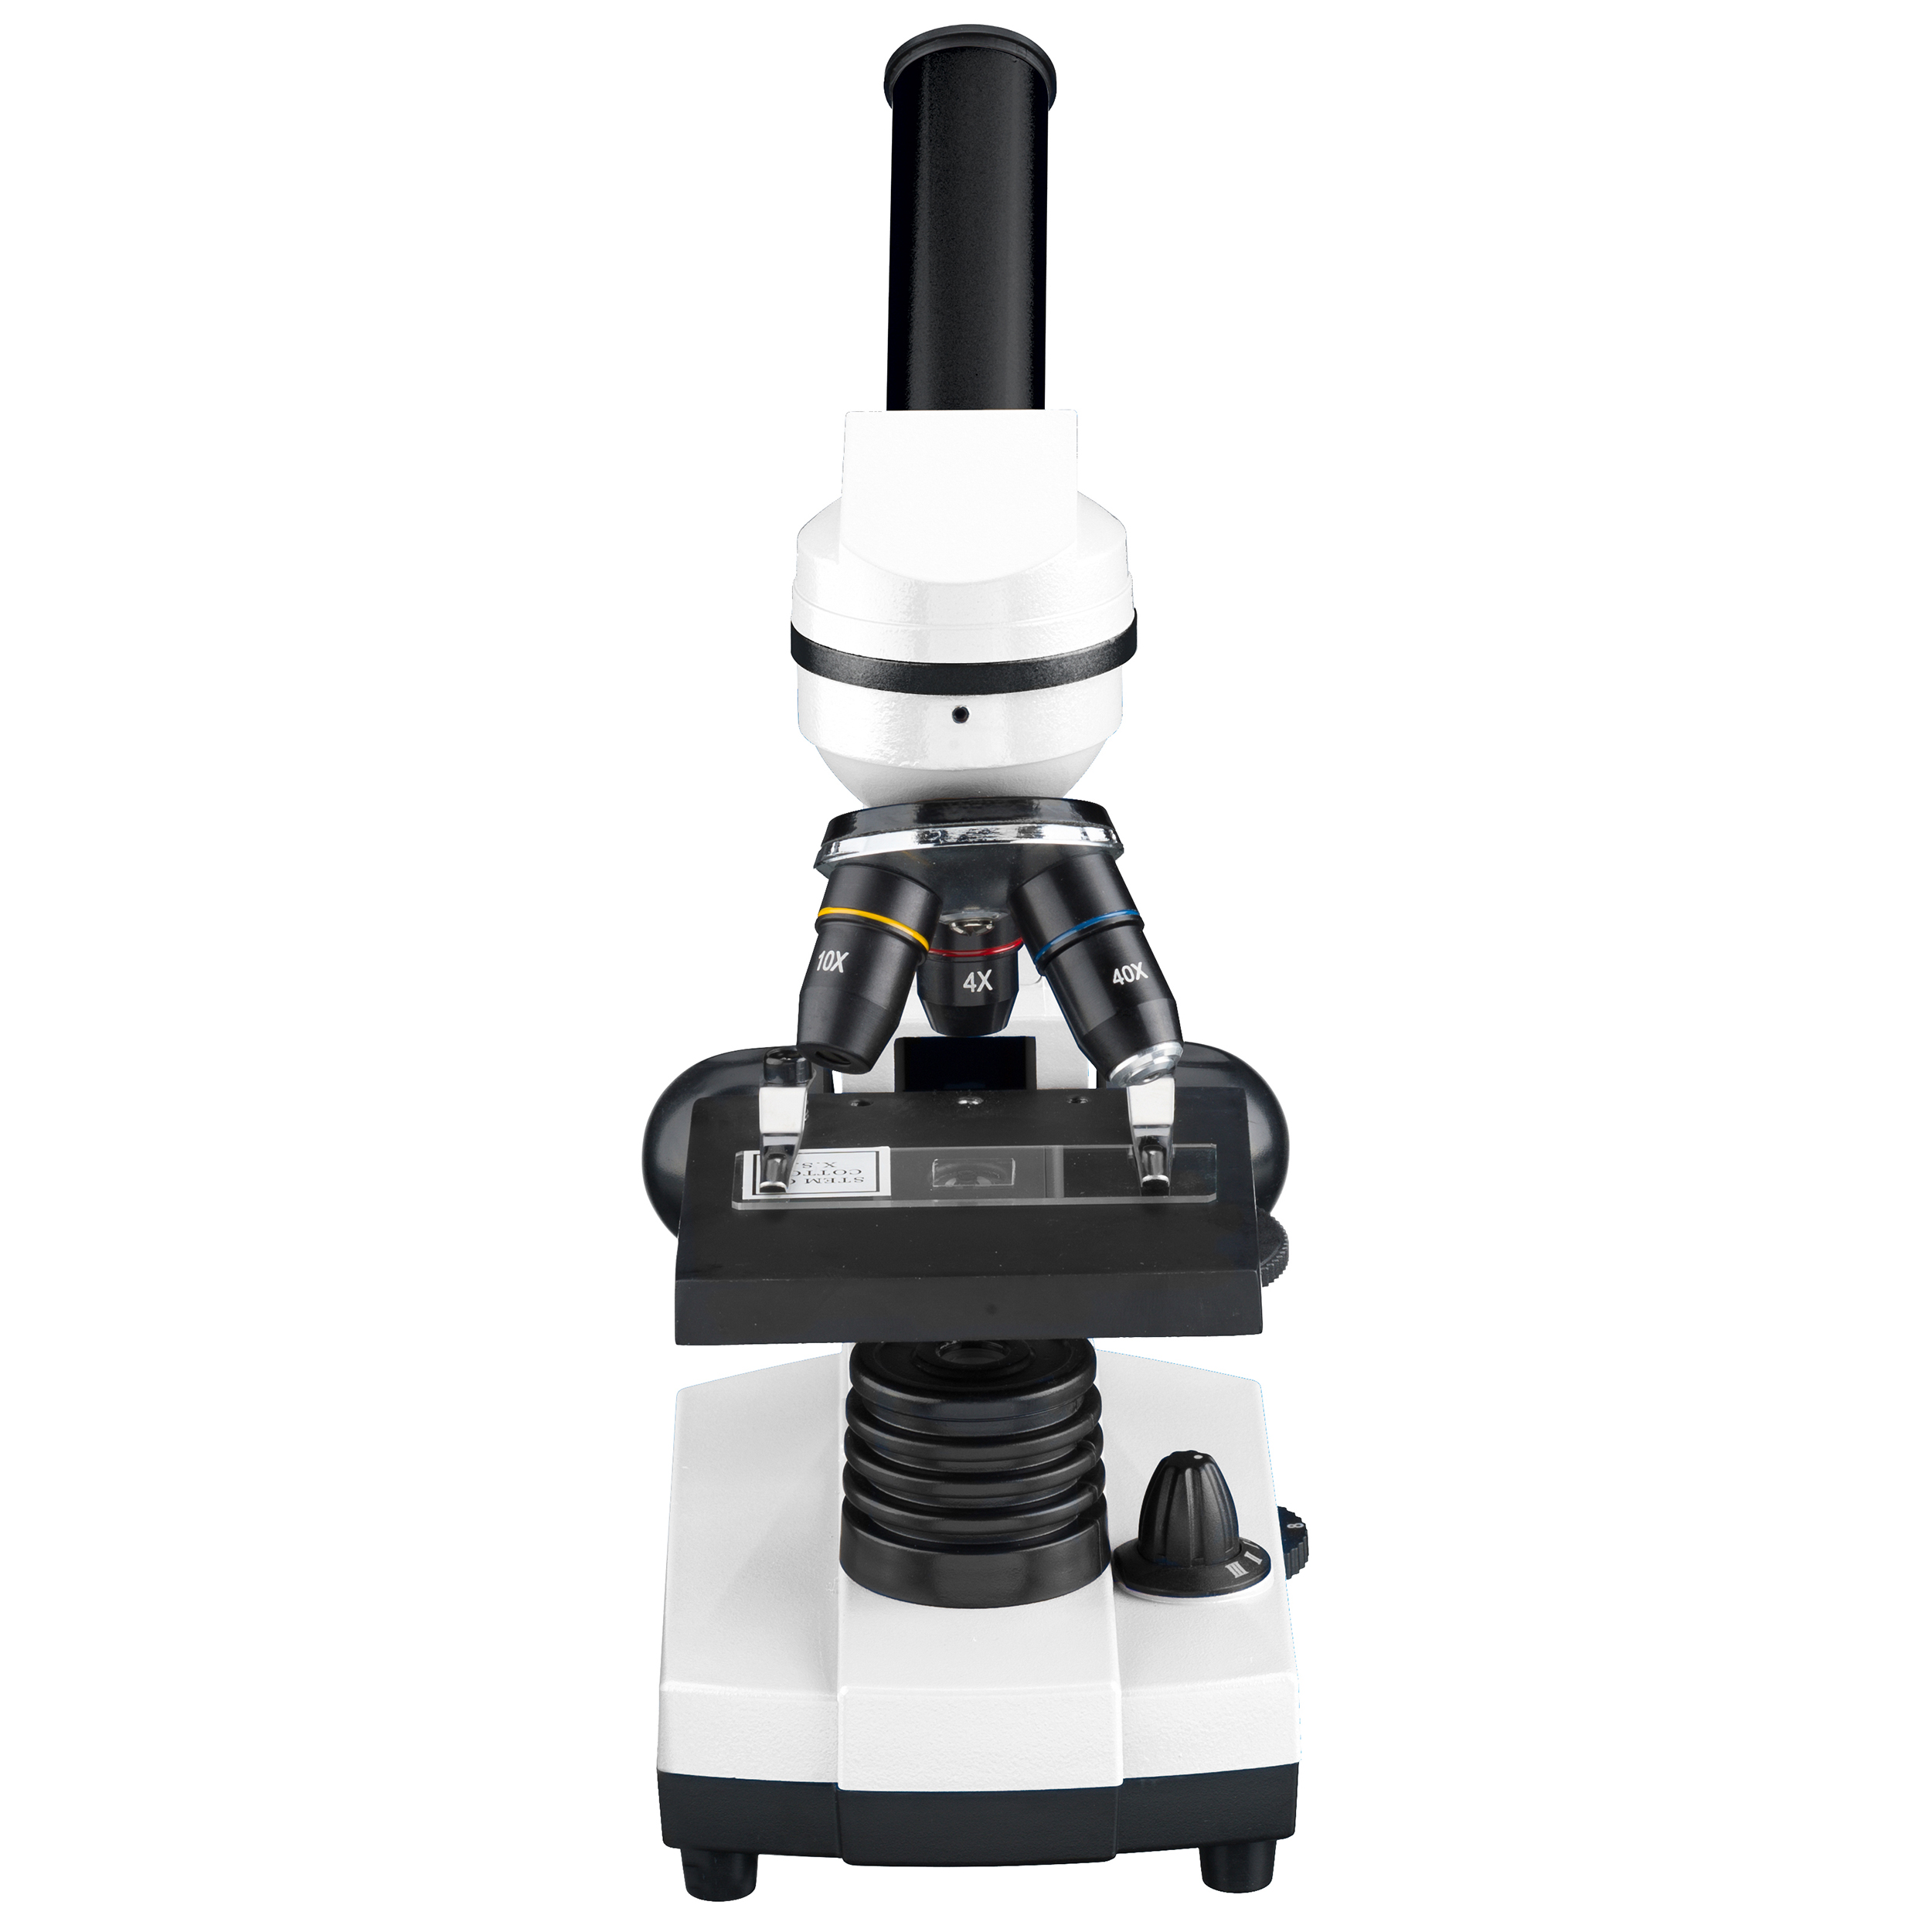 BRESSER JUNIOR Biolux SEL Student Microscope with hard shell case